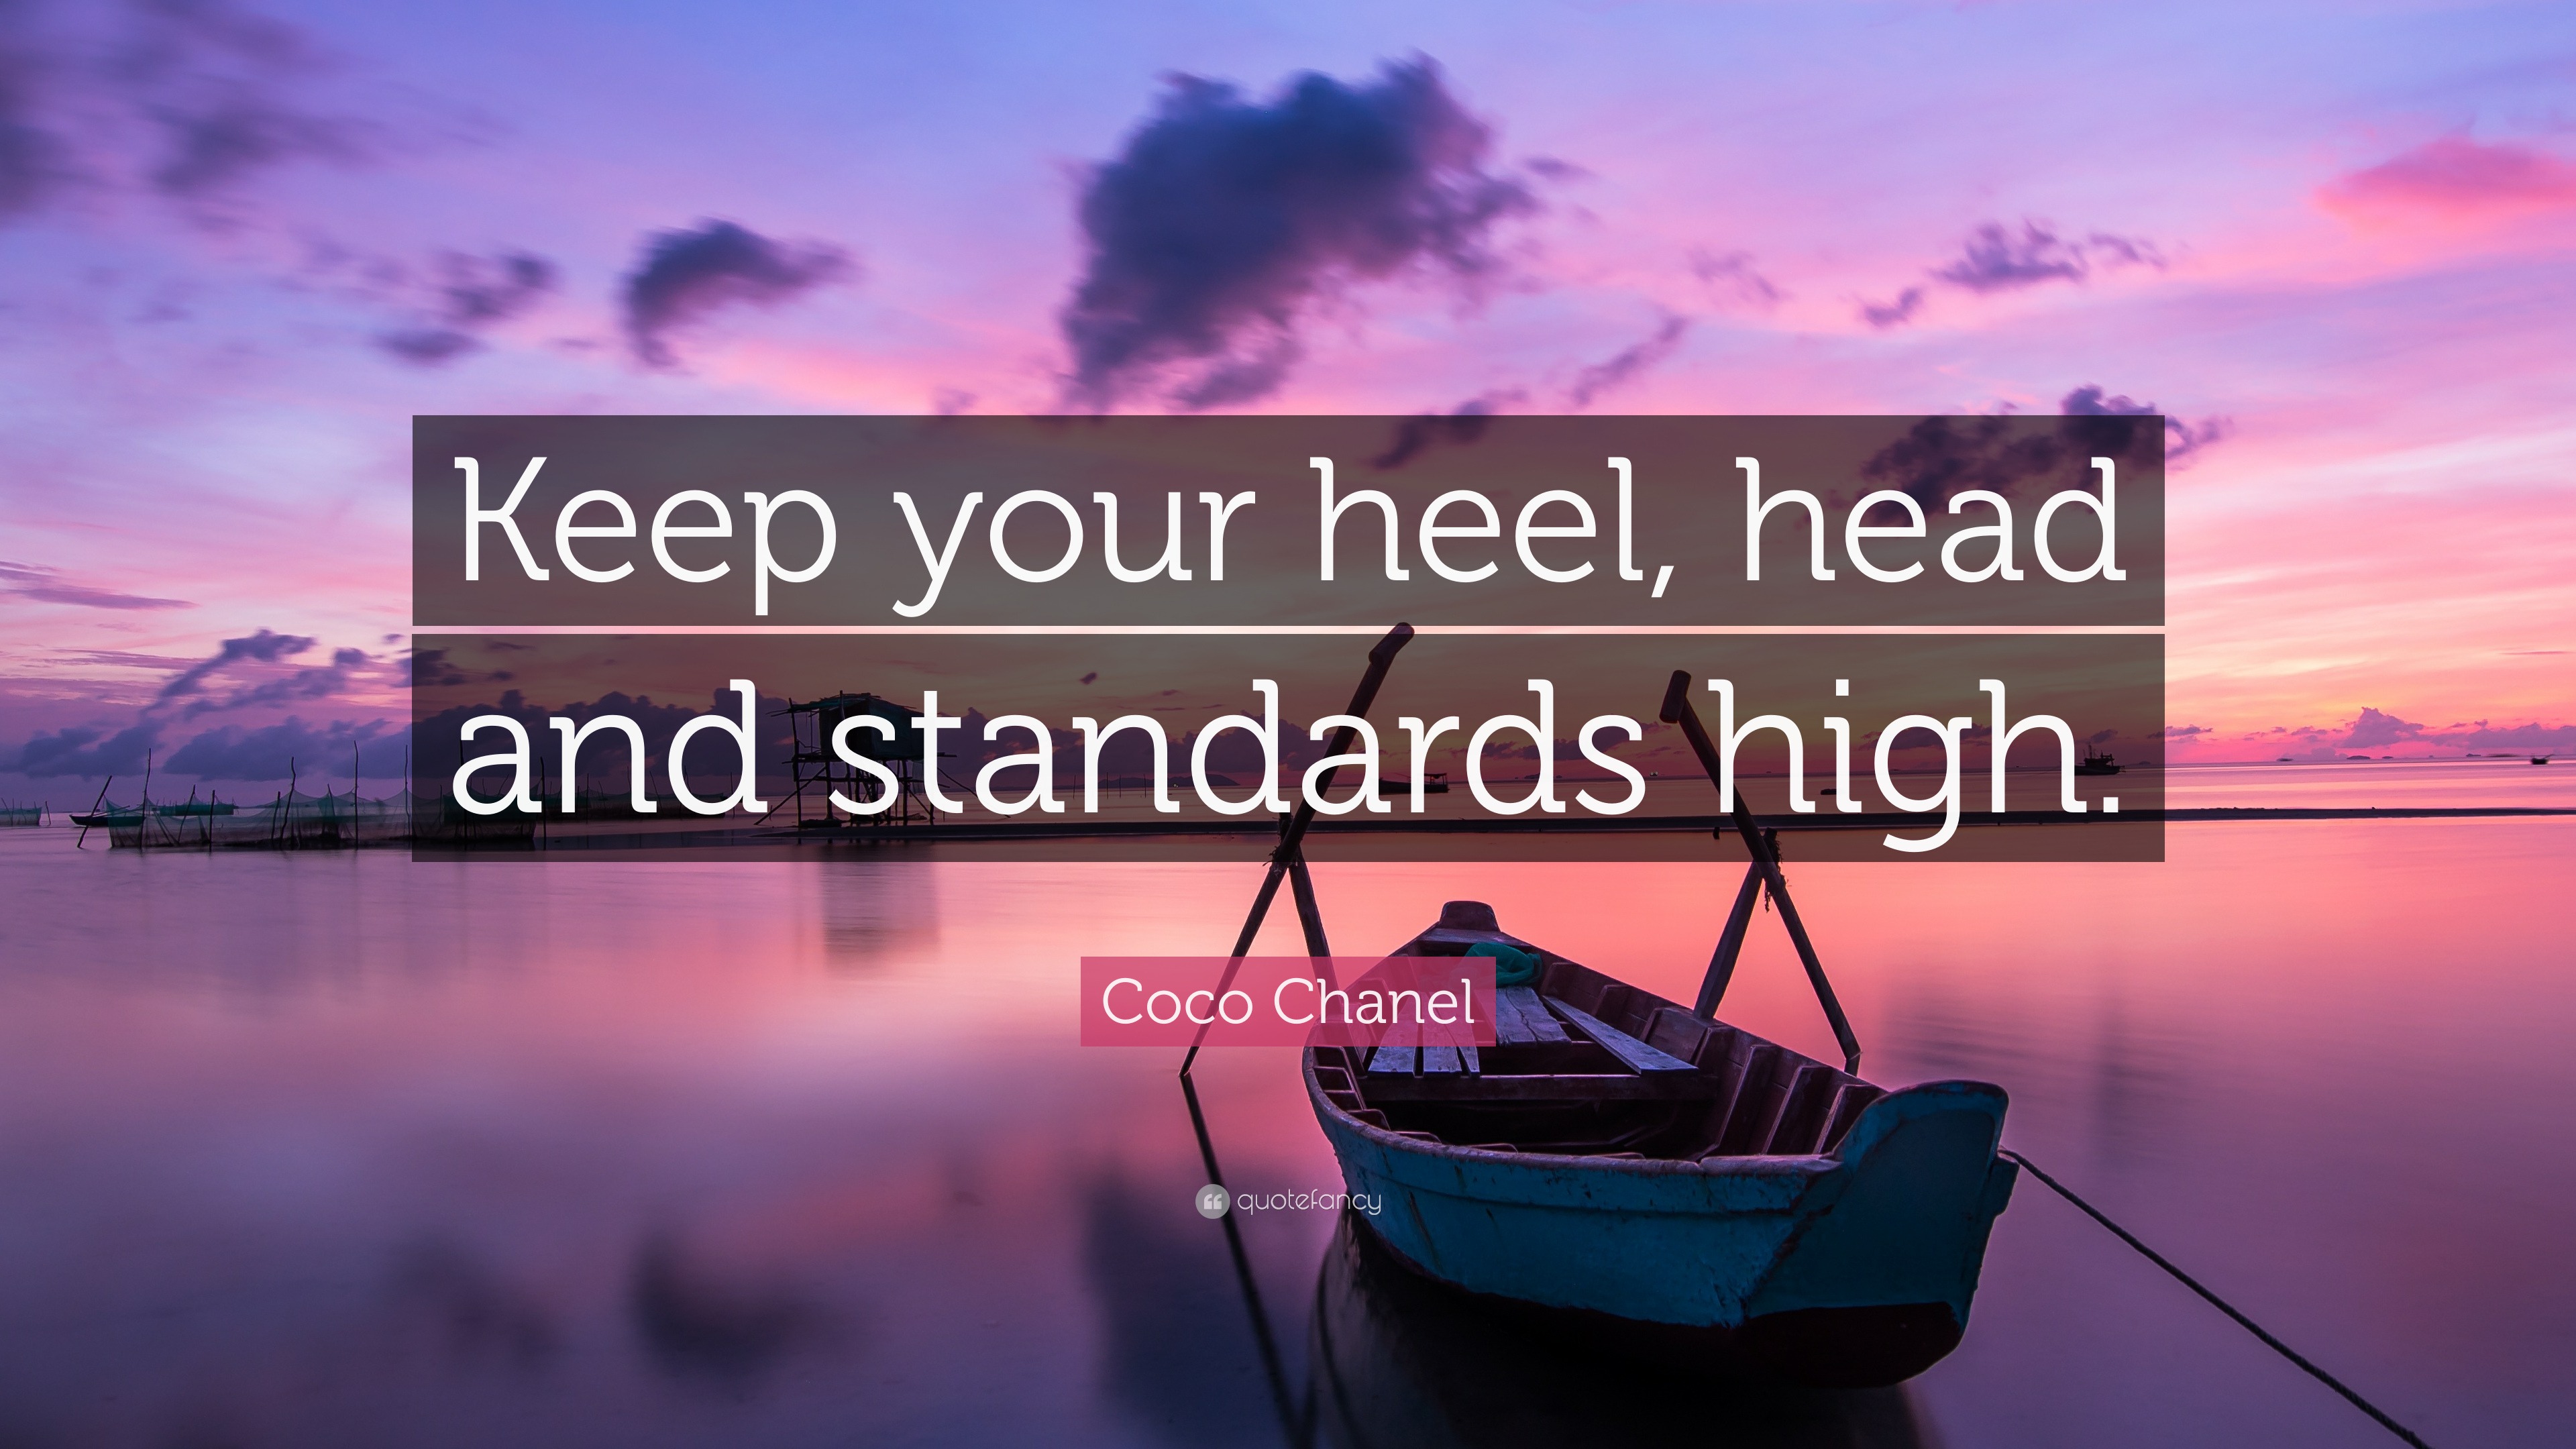 Amazon.com: Govivo Keep Your Heels, Head And Standards High - Hand-Drawn  Wall Decor Art Print with a gray background - 8x10 unframed artwork printed  on photograph paper: Posters & Prints